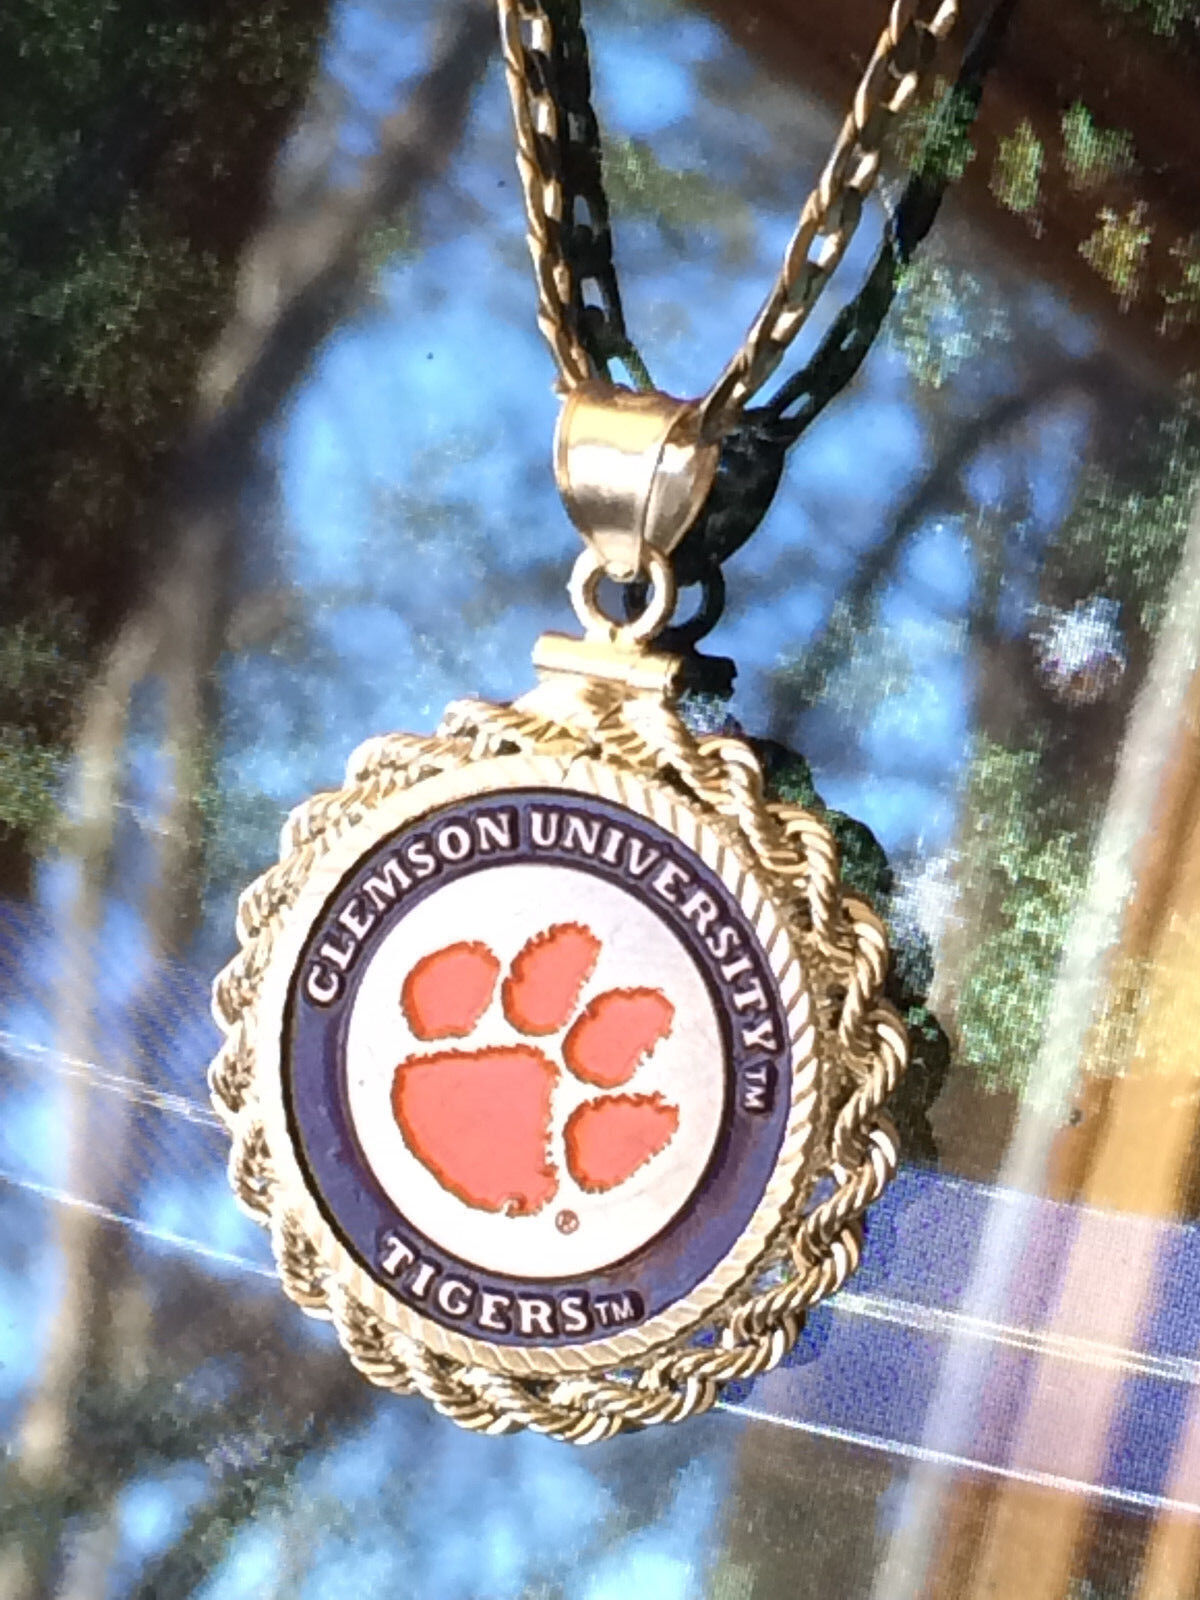 STERLING SILVER PENDANT W/ NCAA CLEMSON TIGERS a or b SETTING JEWELRY GIFT Popularny, autentyczny